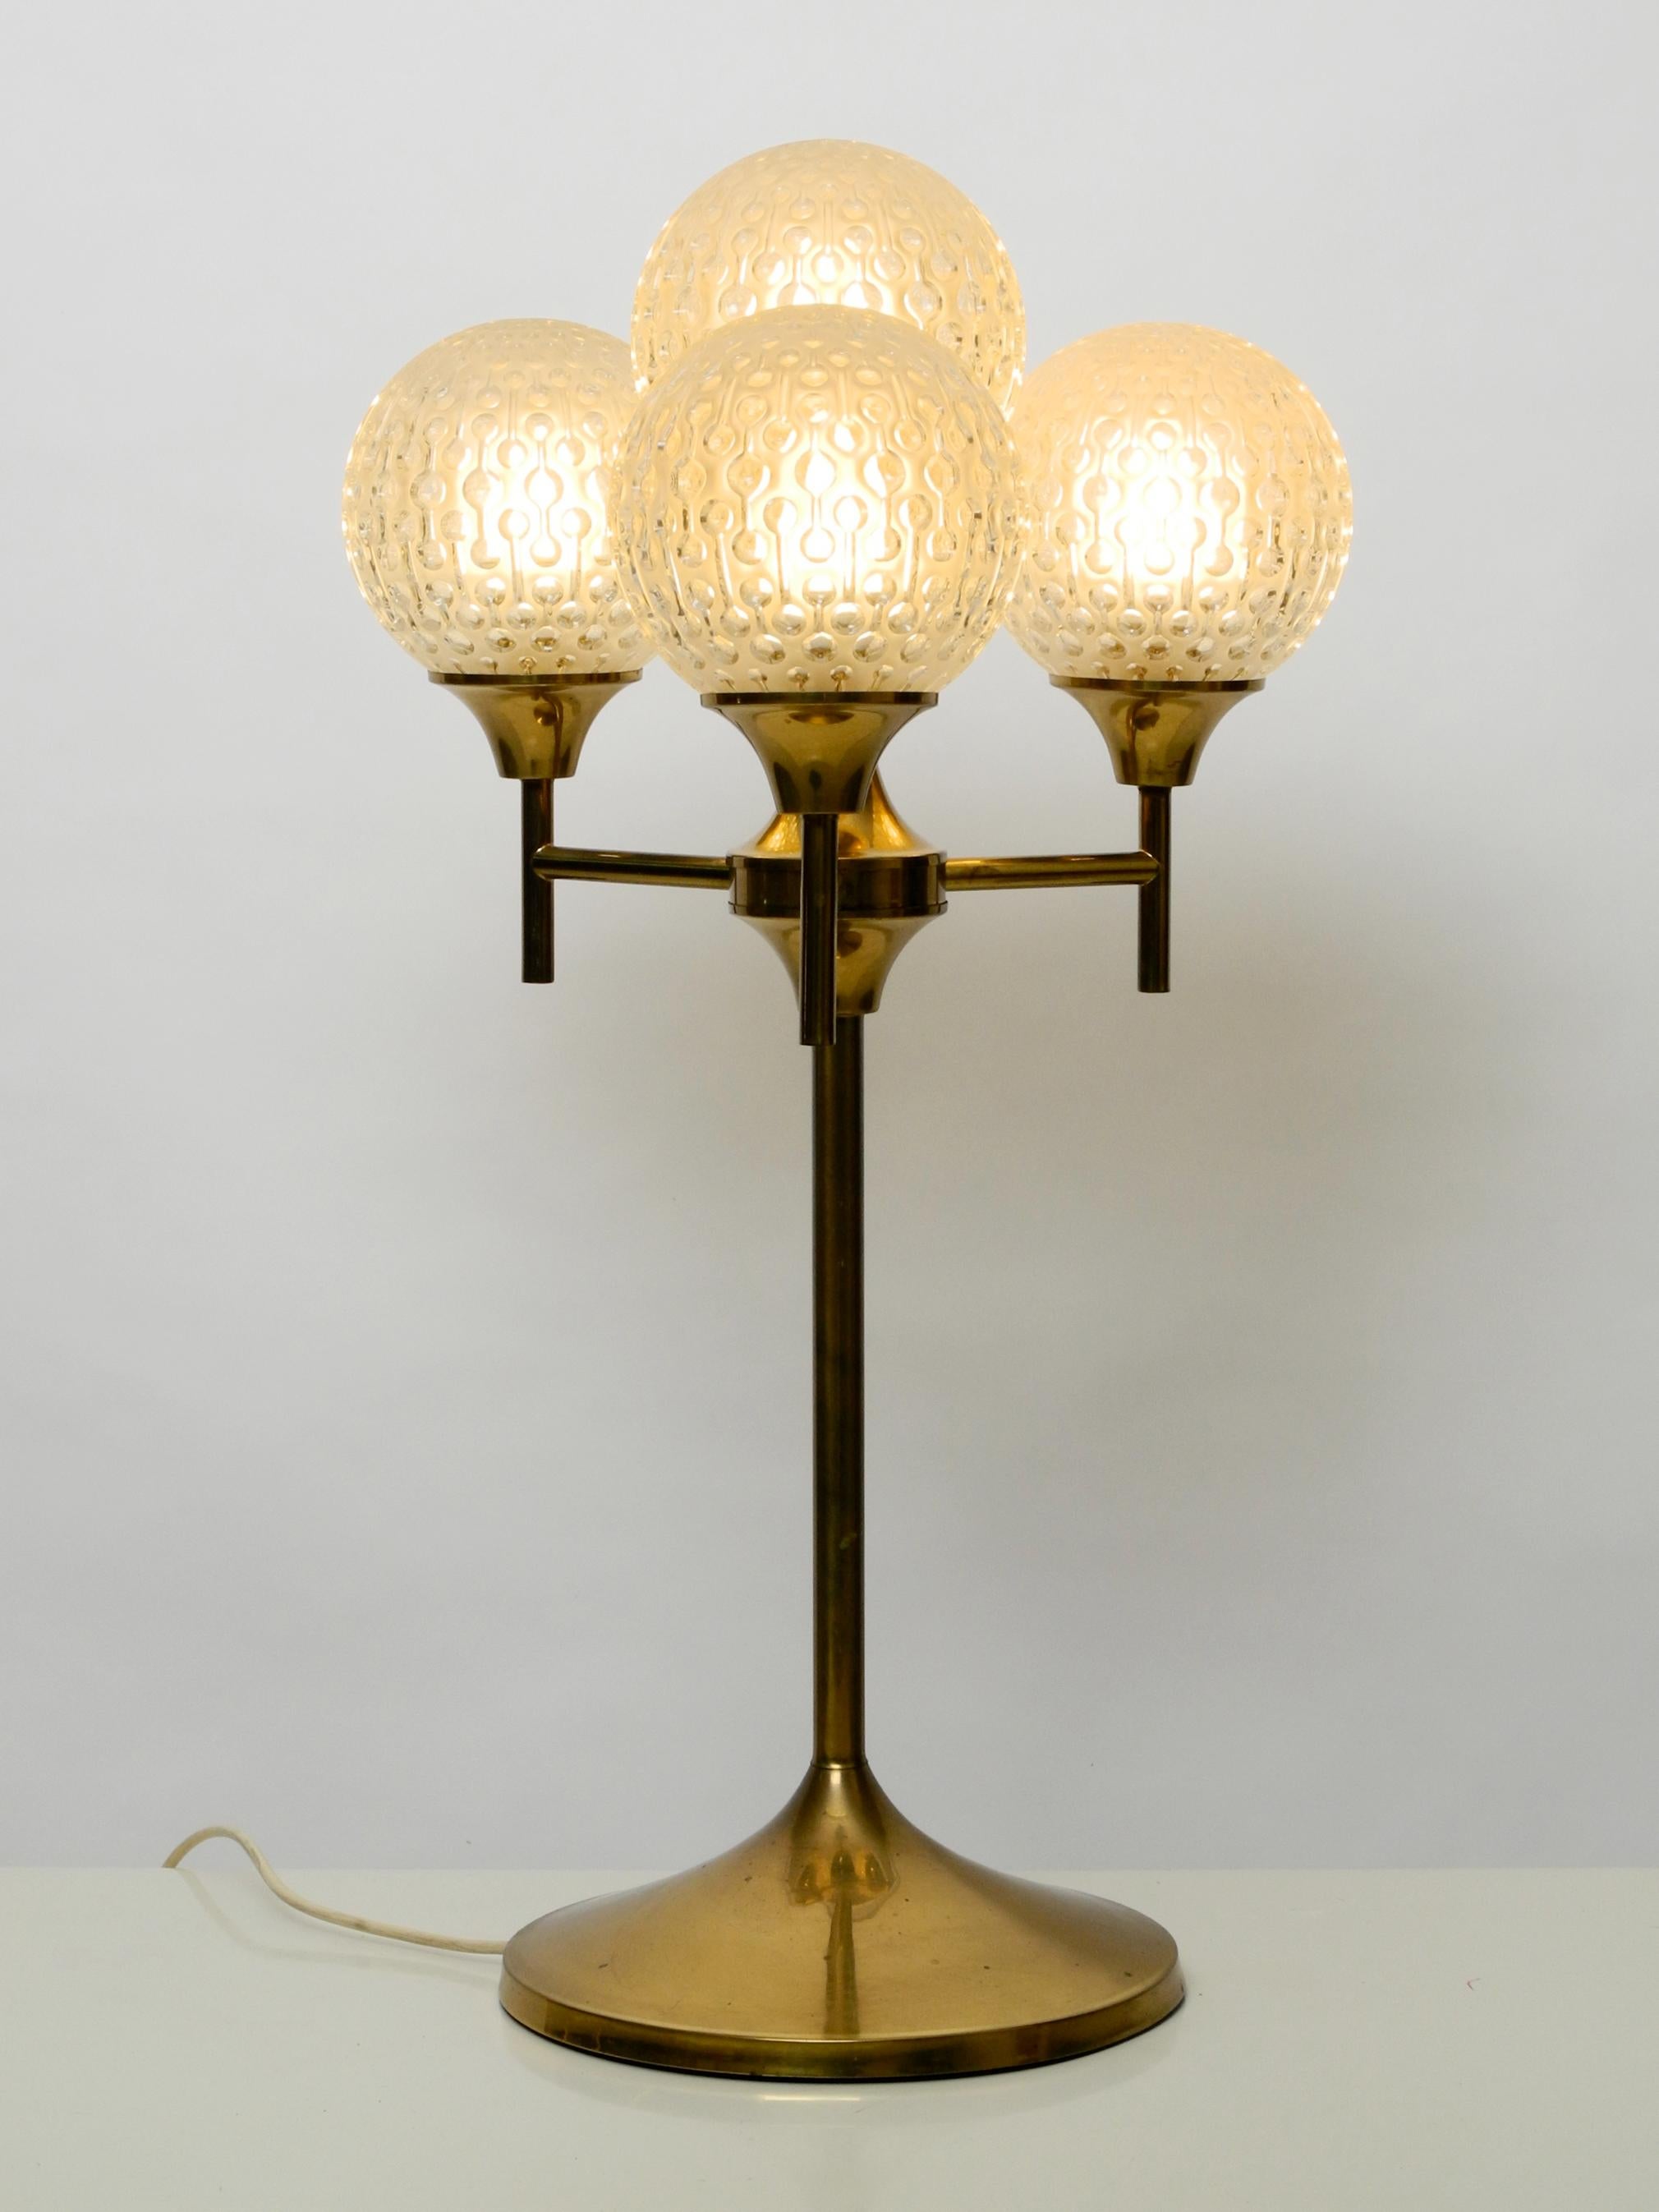 Exceptional large 1960s full brass table or floor lamp.
Massive lampshades made of 4 heavy glass spheres with abstract circle pattern.
Great minimalistic design with many details and very high quality.
100% original condition and fully